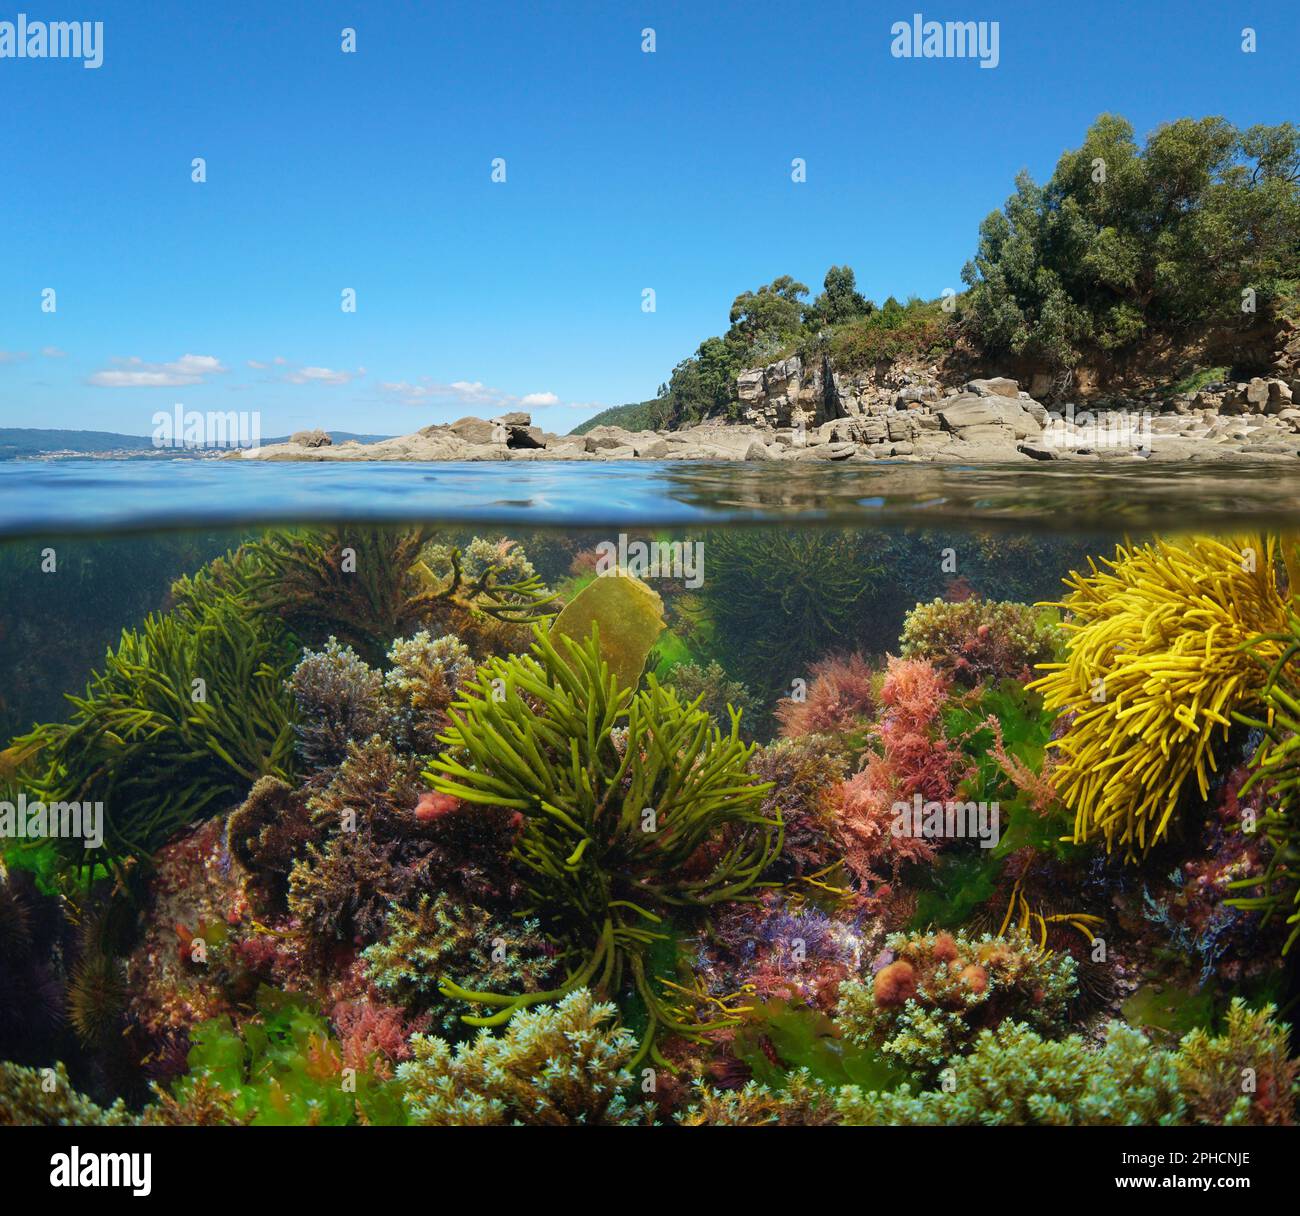 Coastline and various colorful algae underwater in the ocean, Atlantic coast of Spain in Galicia, split level view over and under water surface Stock Photo